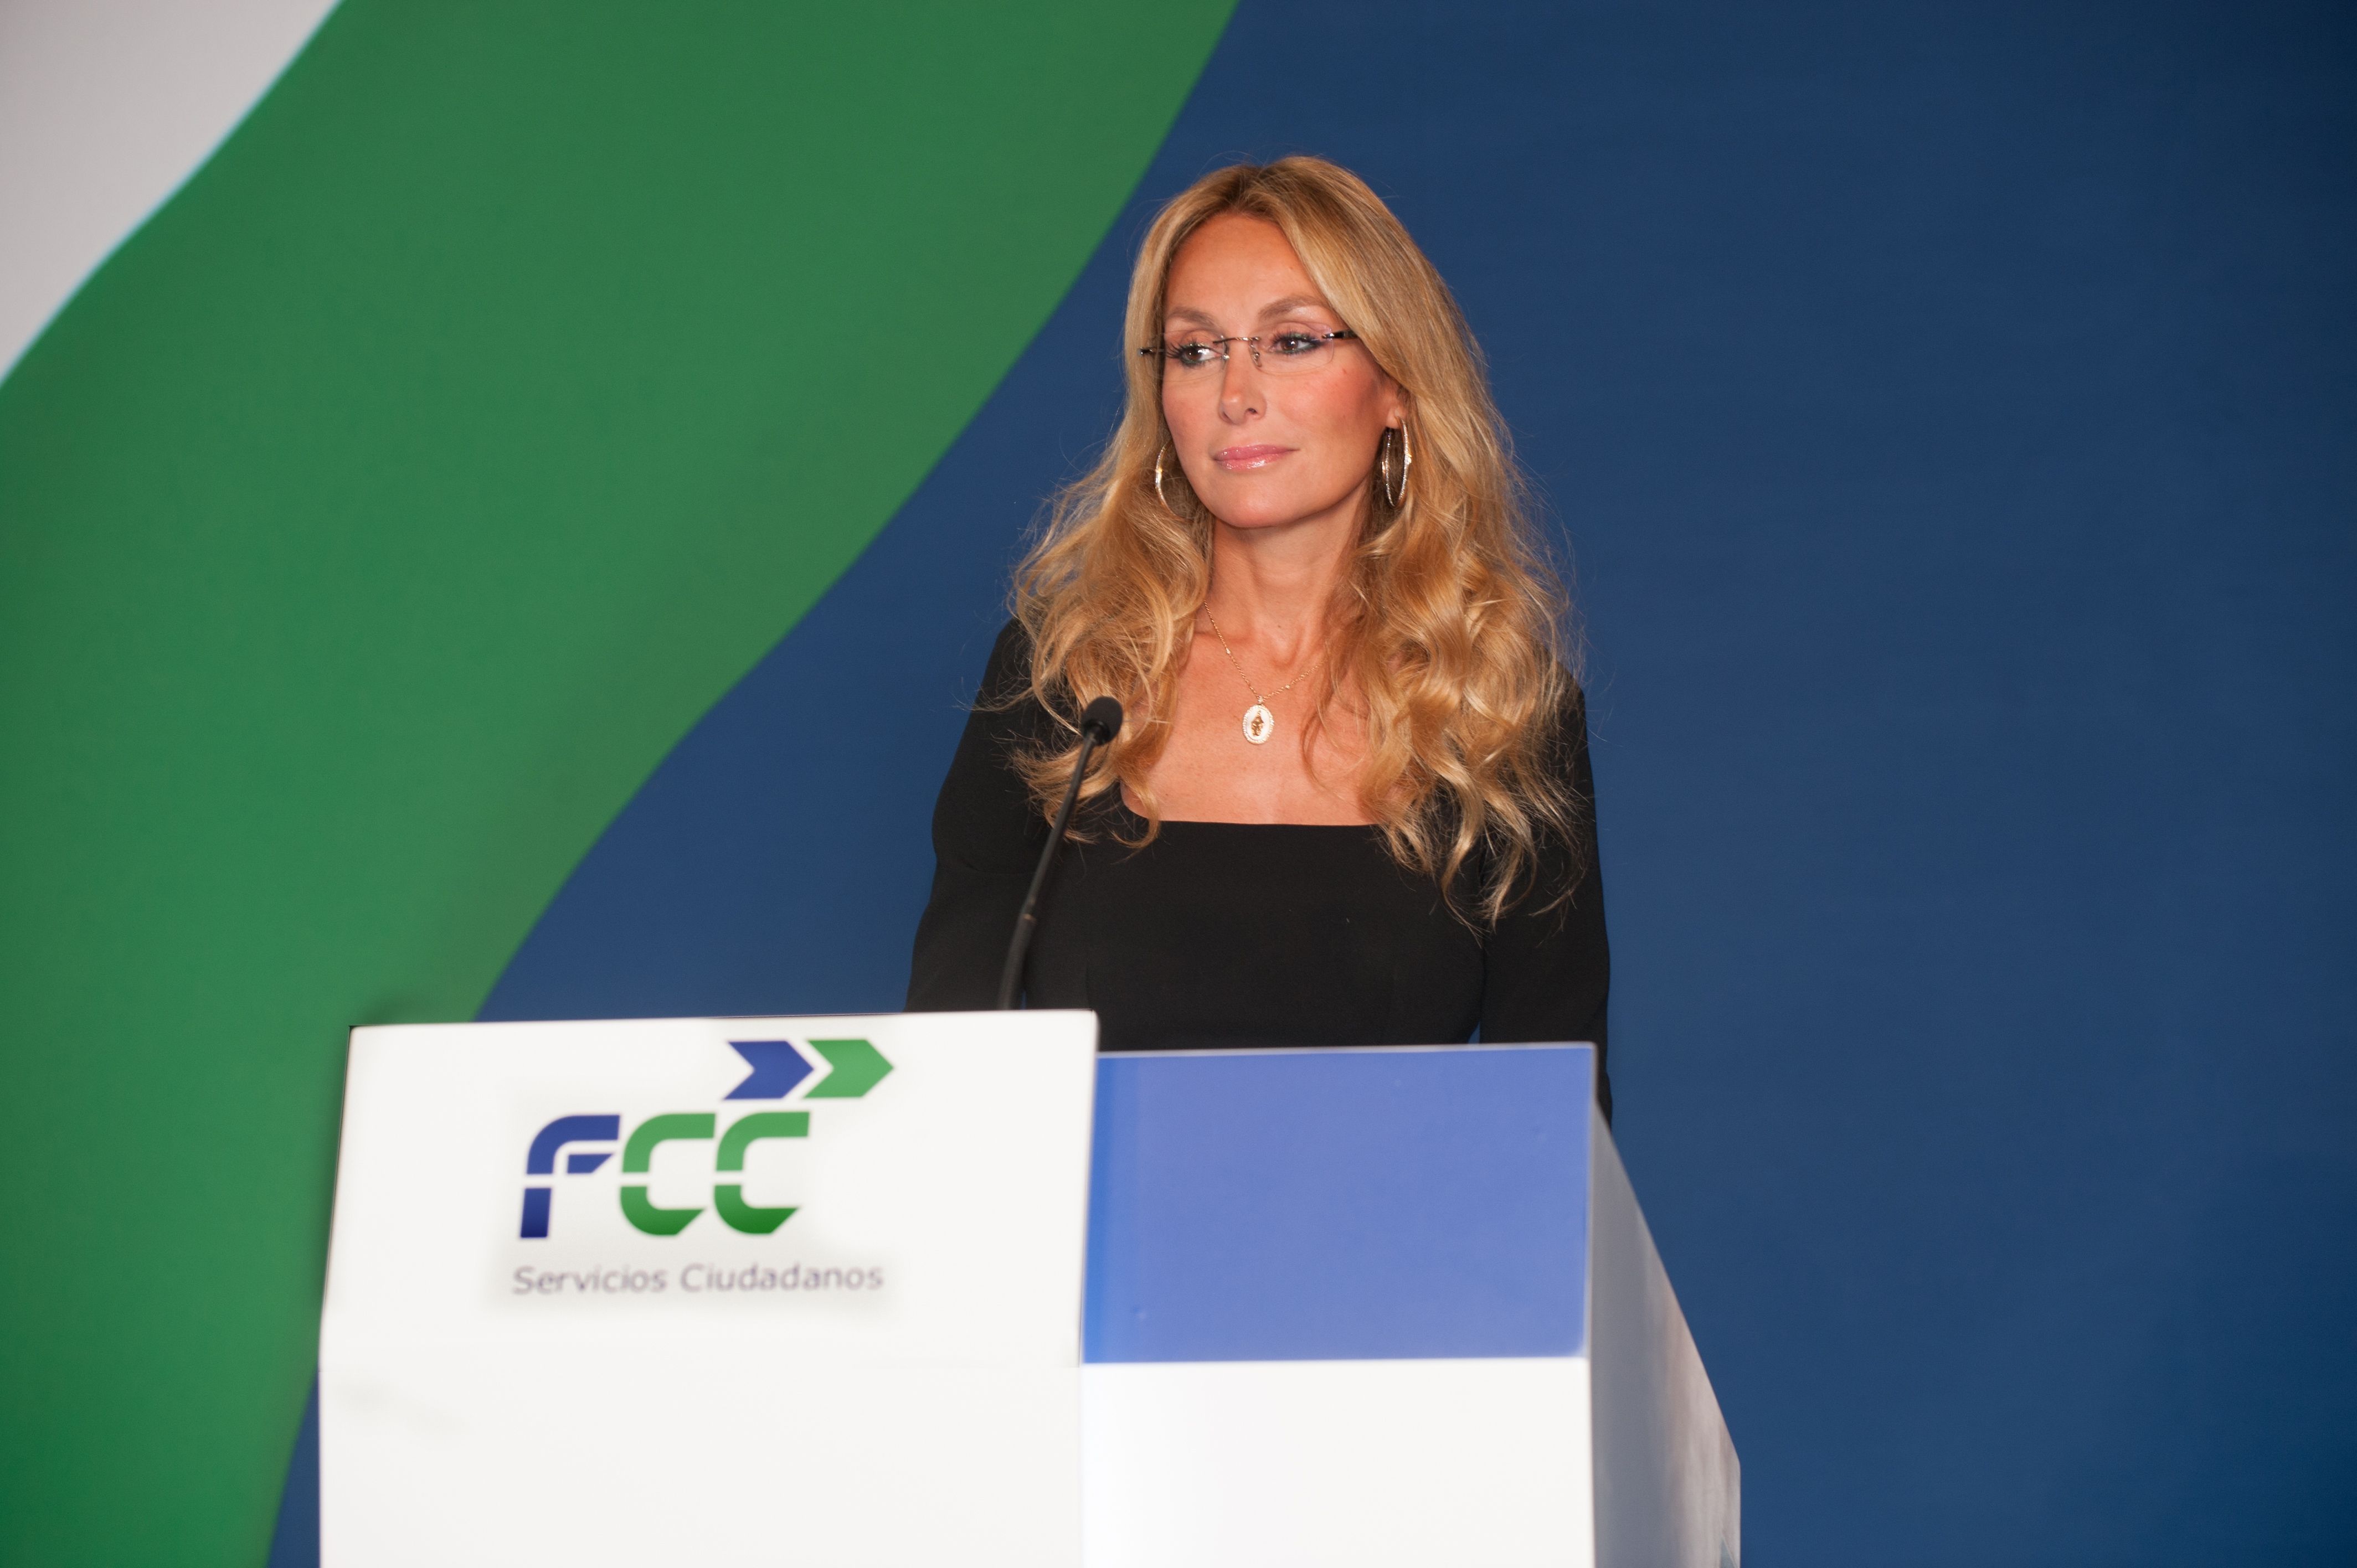 Esther Alcocer Koplowitz chairs her first FCC shareholders' meeting